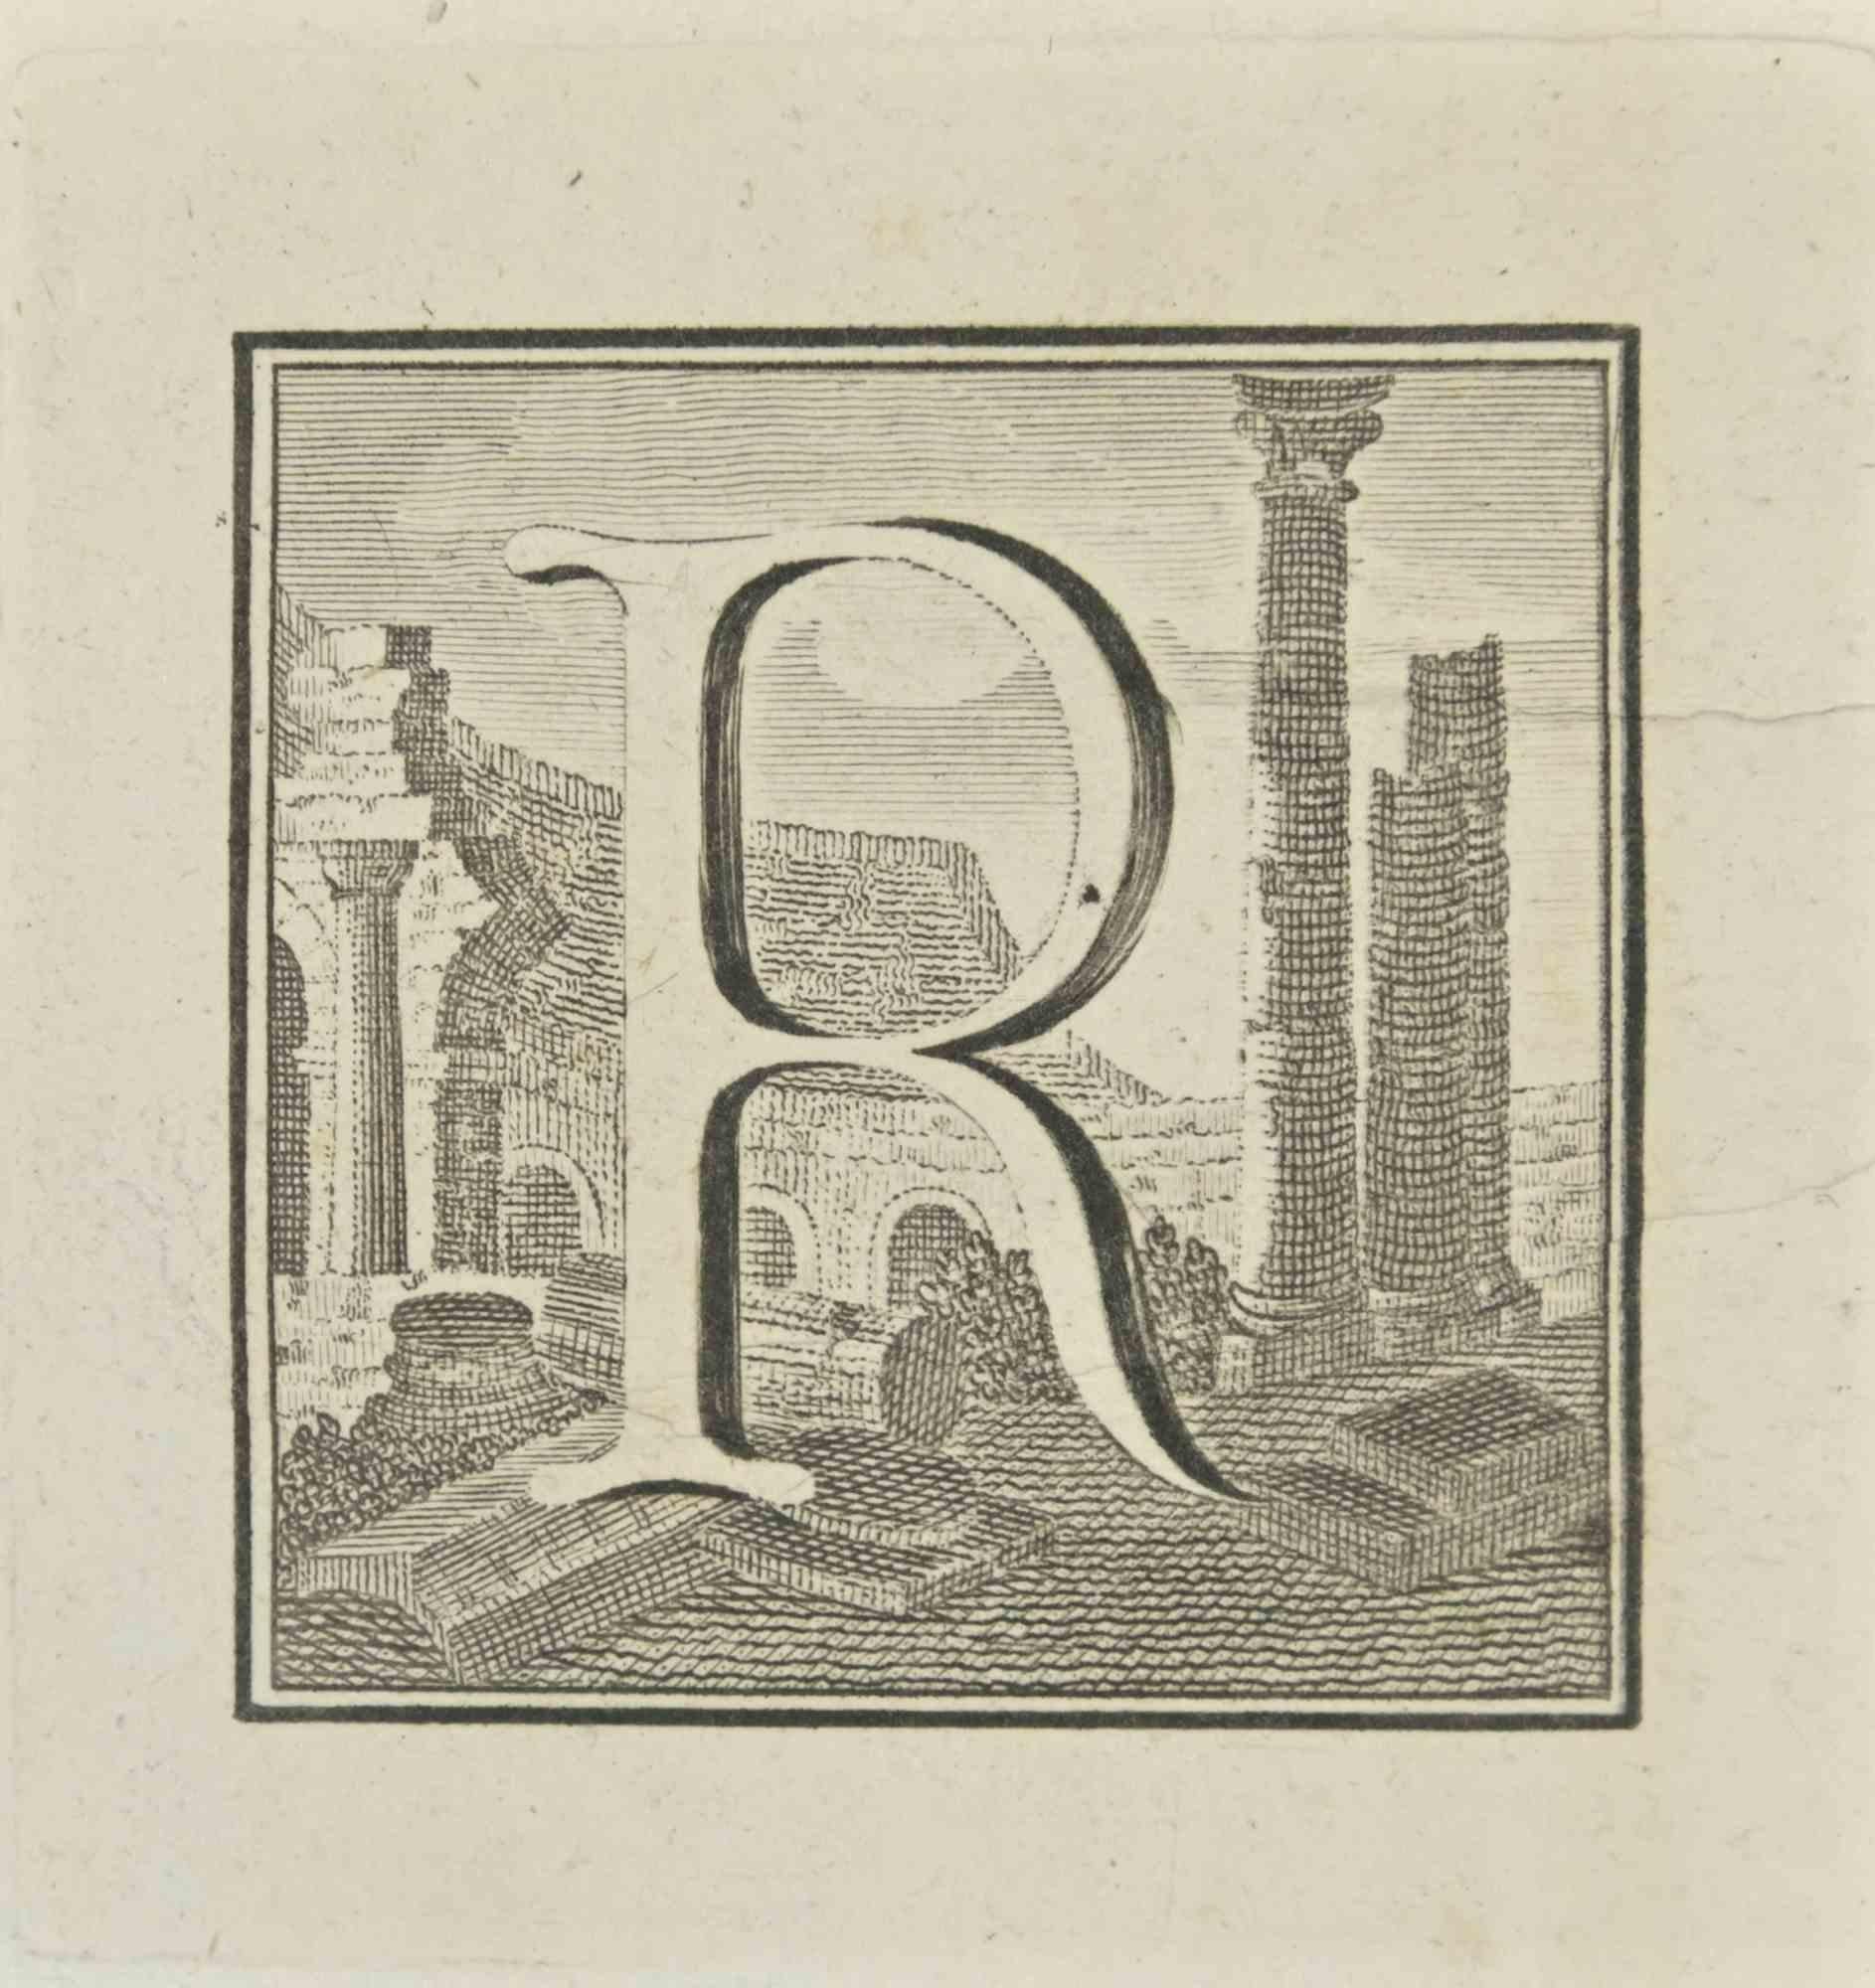 Letter R is an Etching realized by Luigi Vanvitelli artist of 18th century.

The etching belongs to the print suite “Antiquities of Herculaneum Exposed” (original title: “Le Antichità di Ercolano Esposte”), an eight-volume volume of engravings of